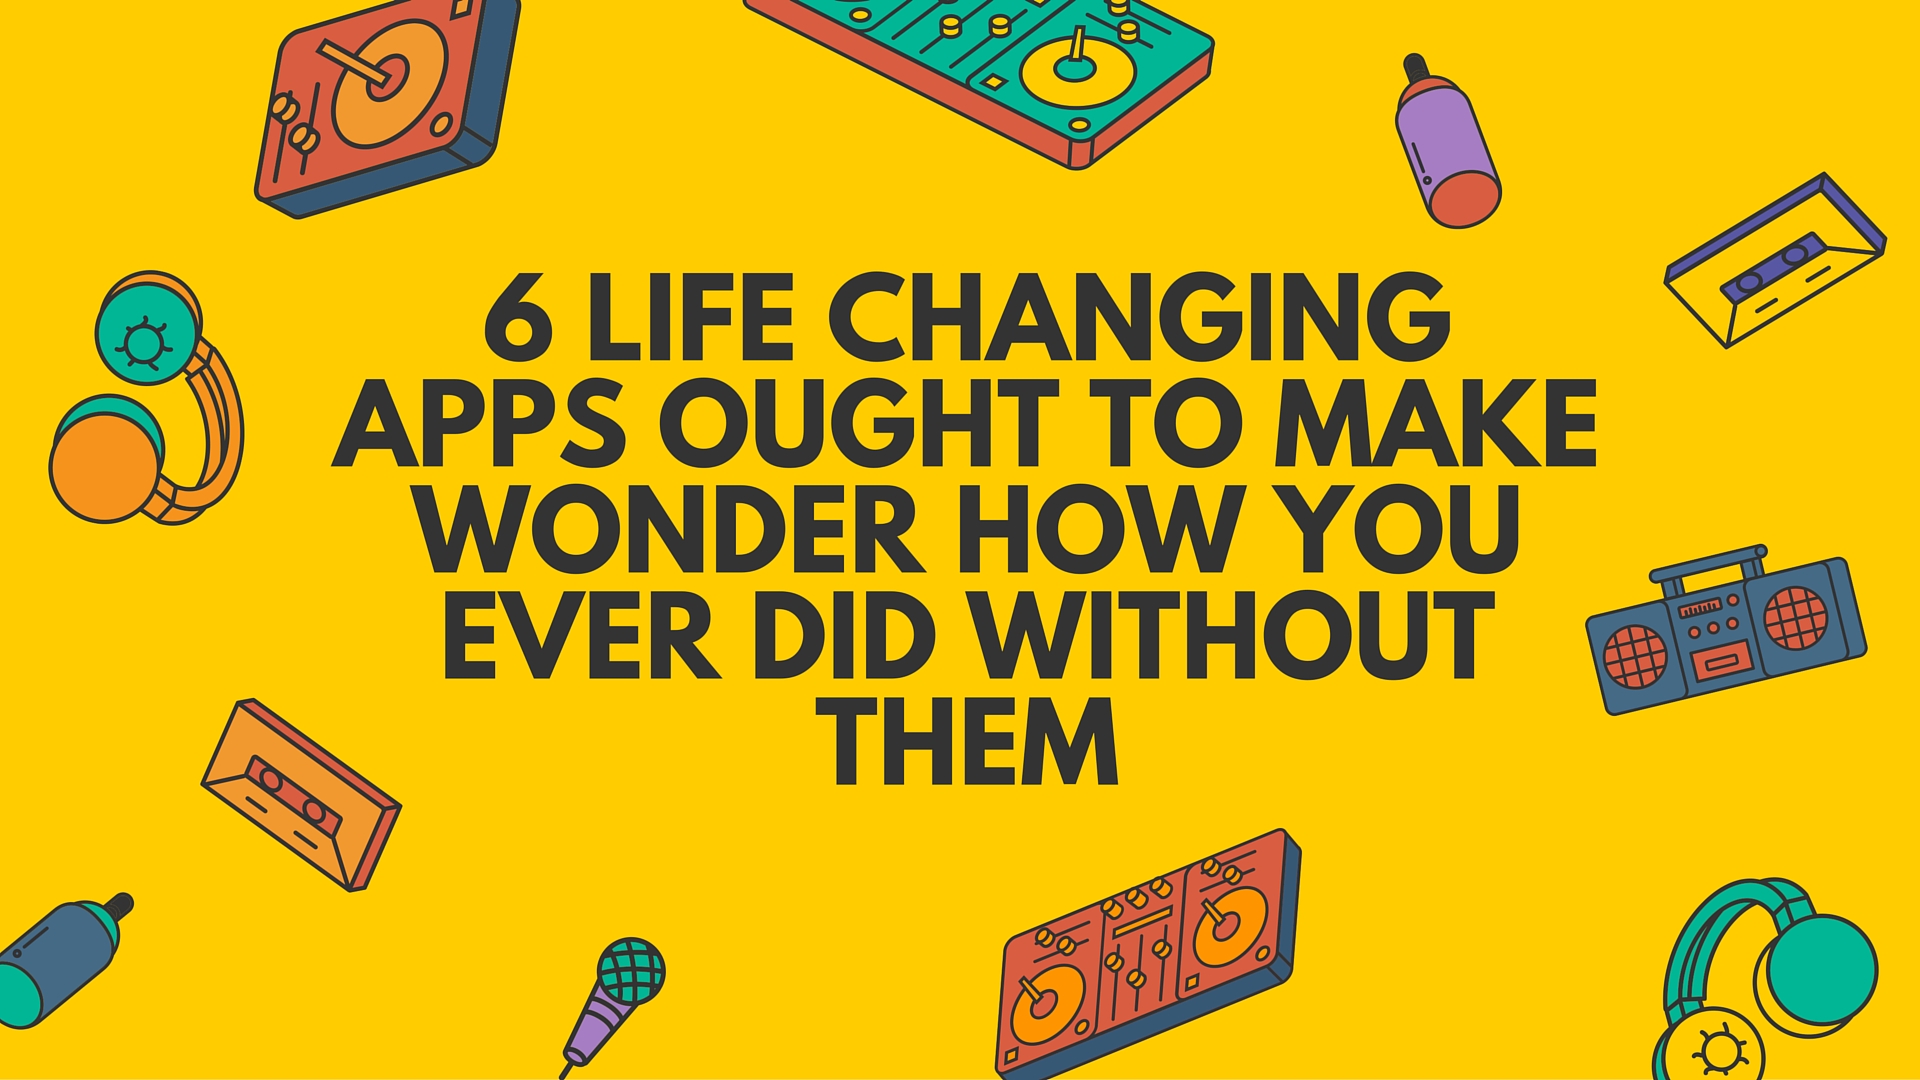 6 Life Changing Apps Ought To Make Wonder How You Ever Did Without Them